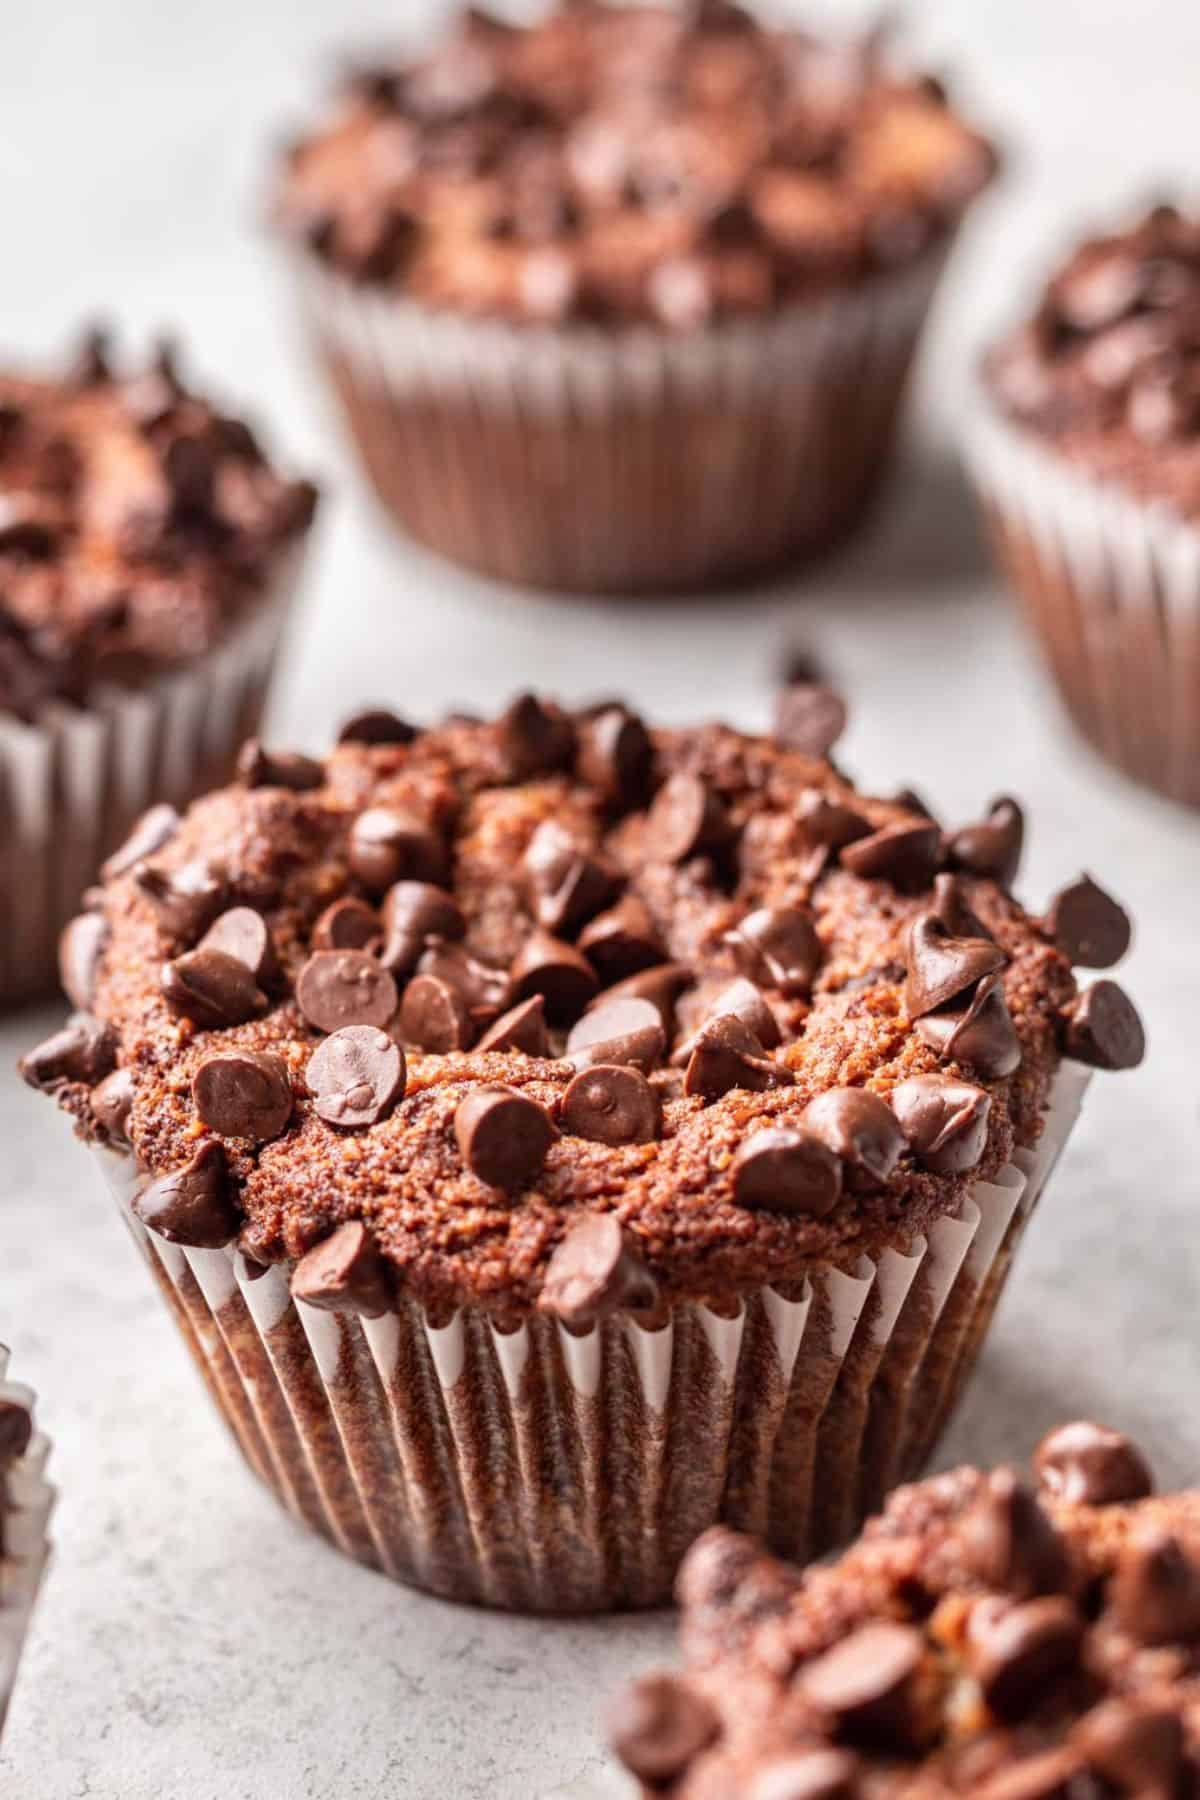 Muffins topped with chocolate chips.